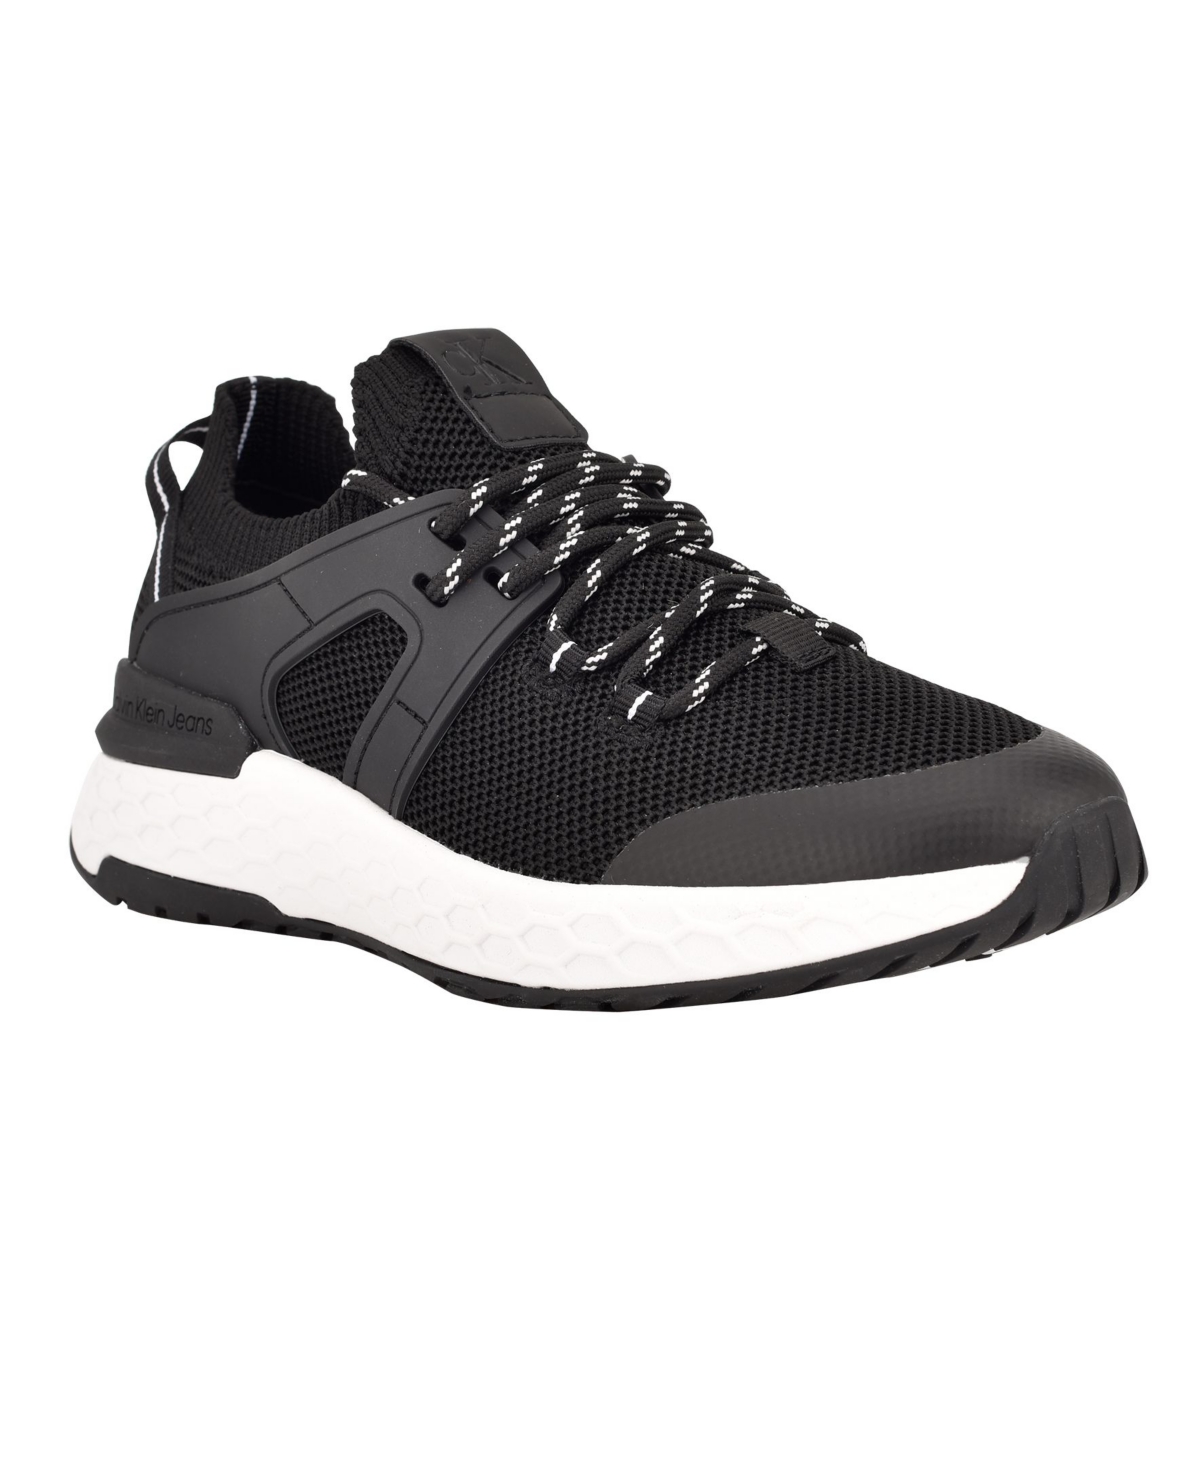 UPC 195972002319 product image for Calvin Klein Women's Aleah Lace-Up Sneakers Women's Shoes | upcitemdb.com